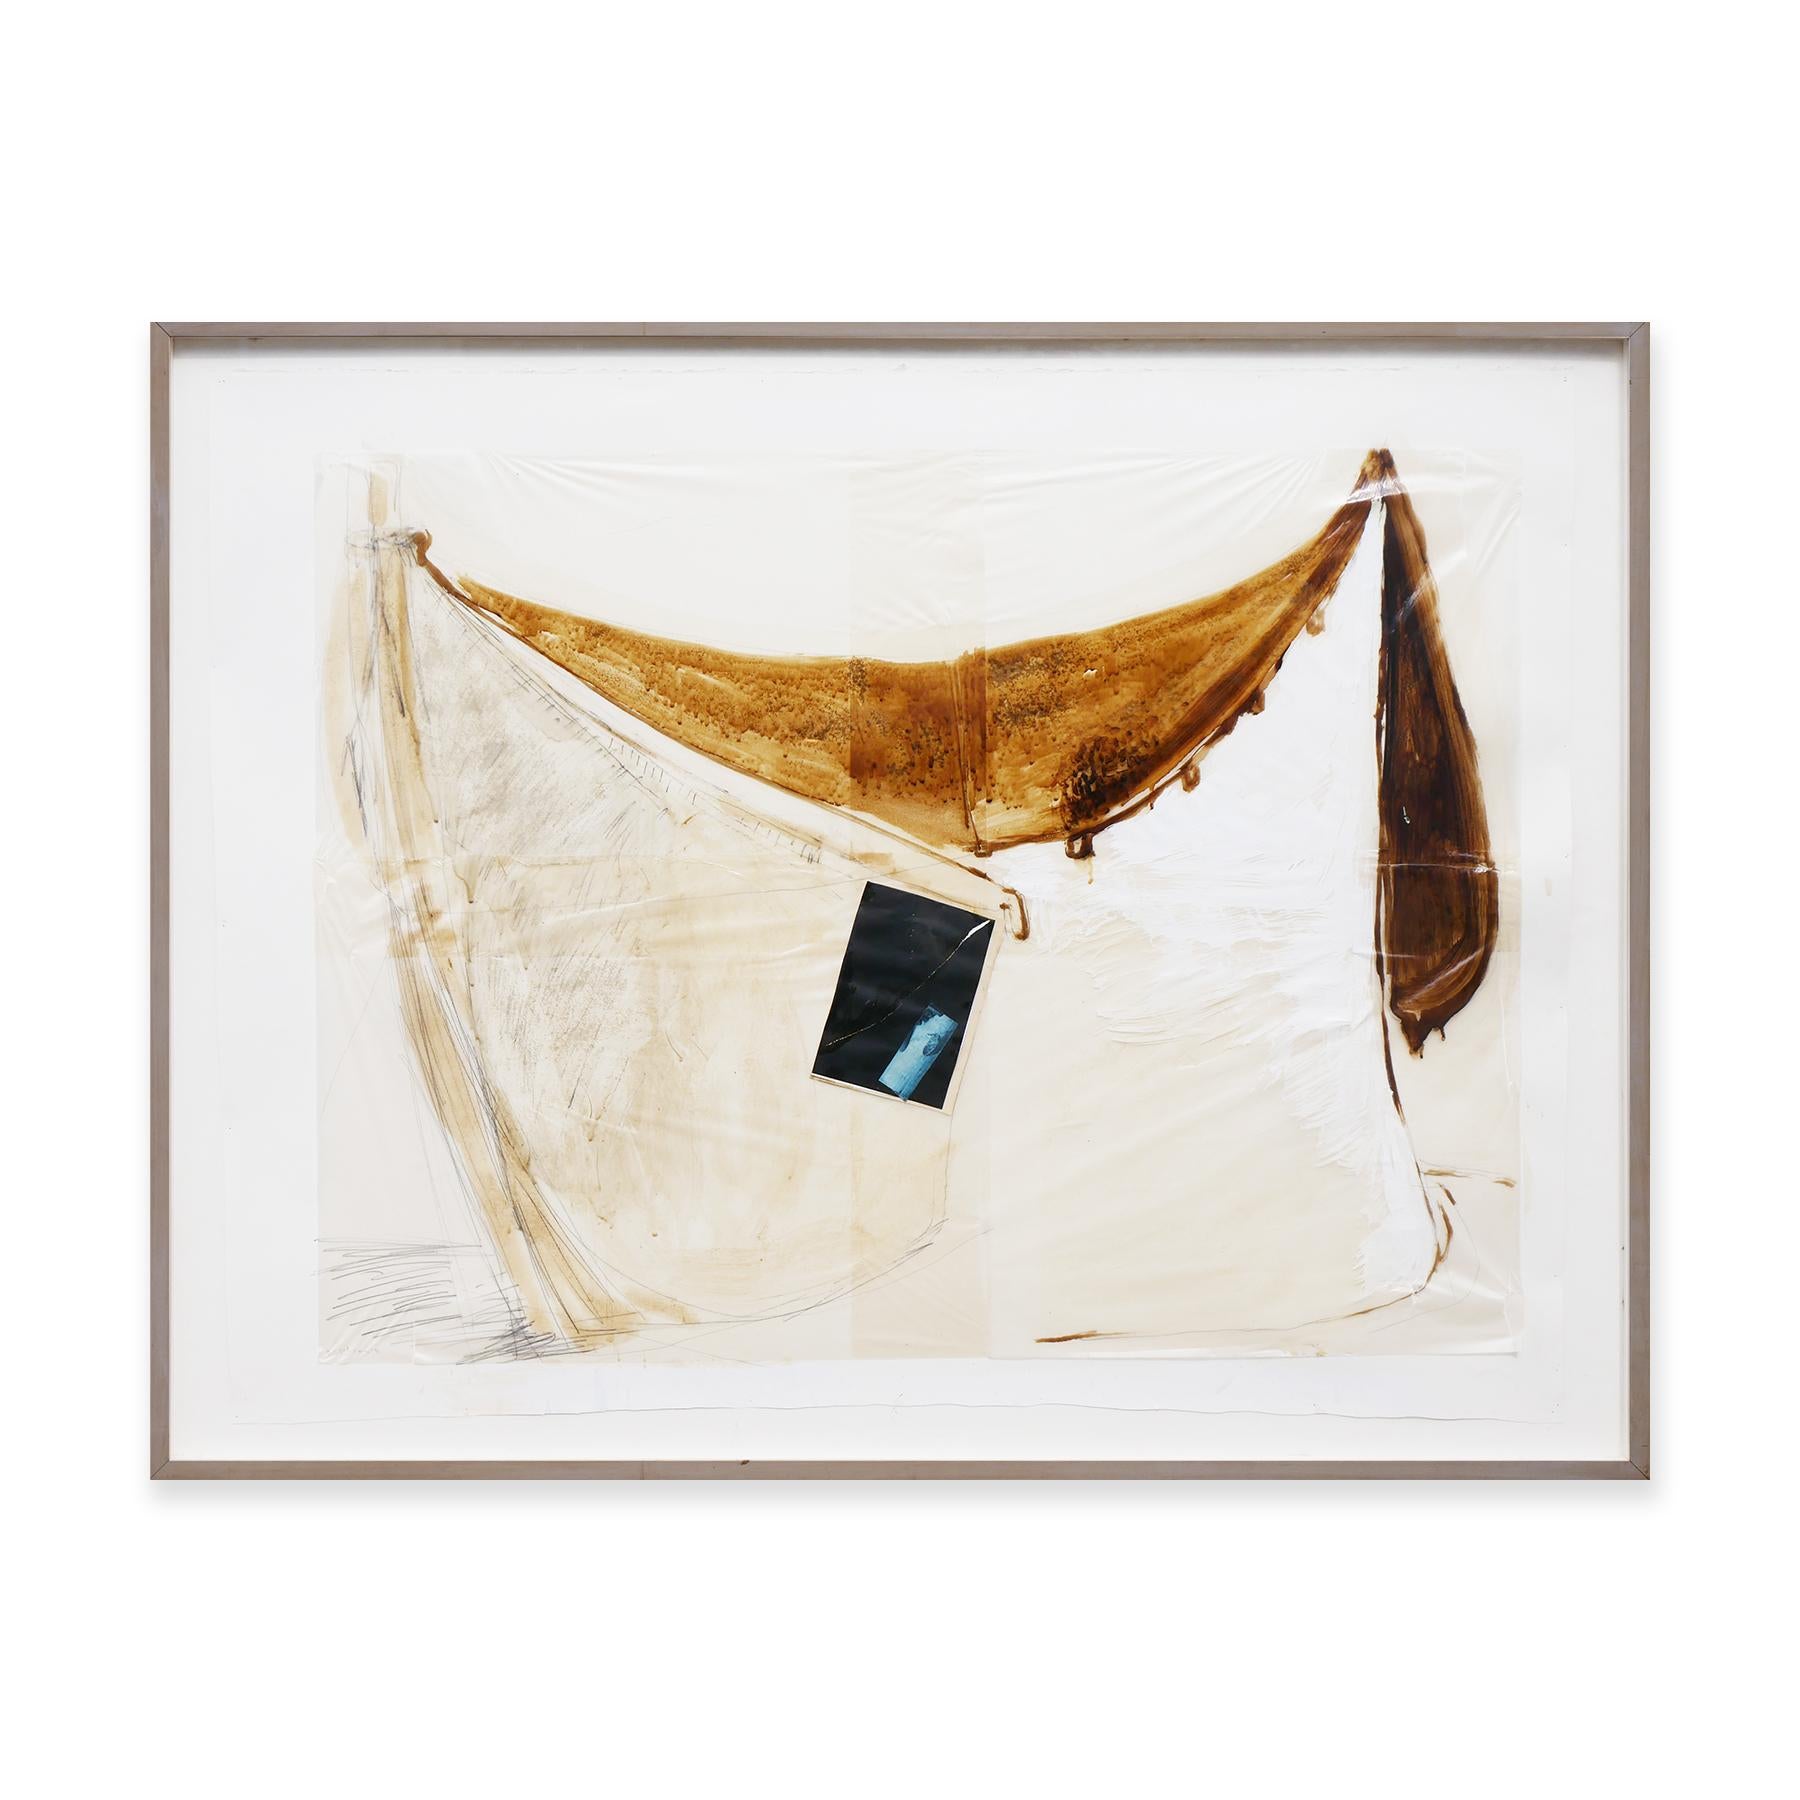 White and brown abstract mixed media painting by Israeli artist Yigal Ozeri. The piece depicts a thin translucent material with brown paint strokes resembling a curtain draping. A blue-toned photograph is also seen hanging by the material. Signed